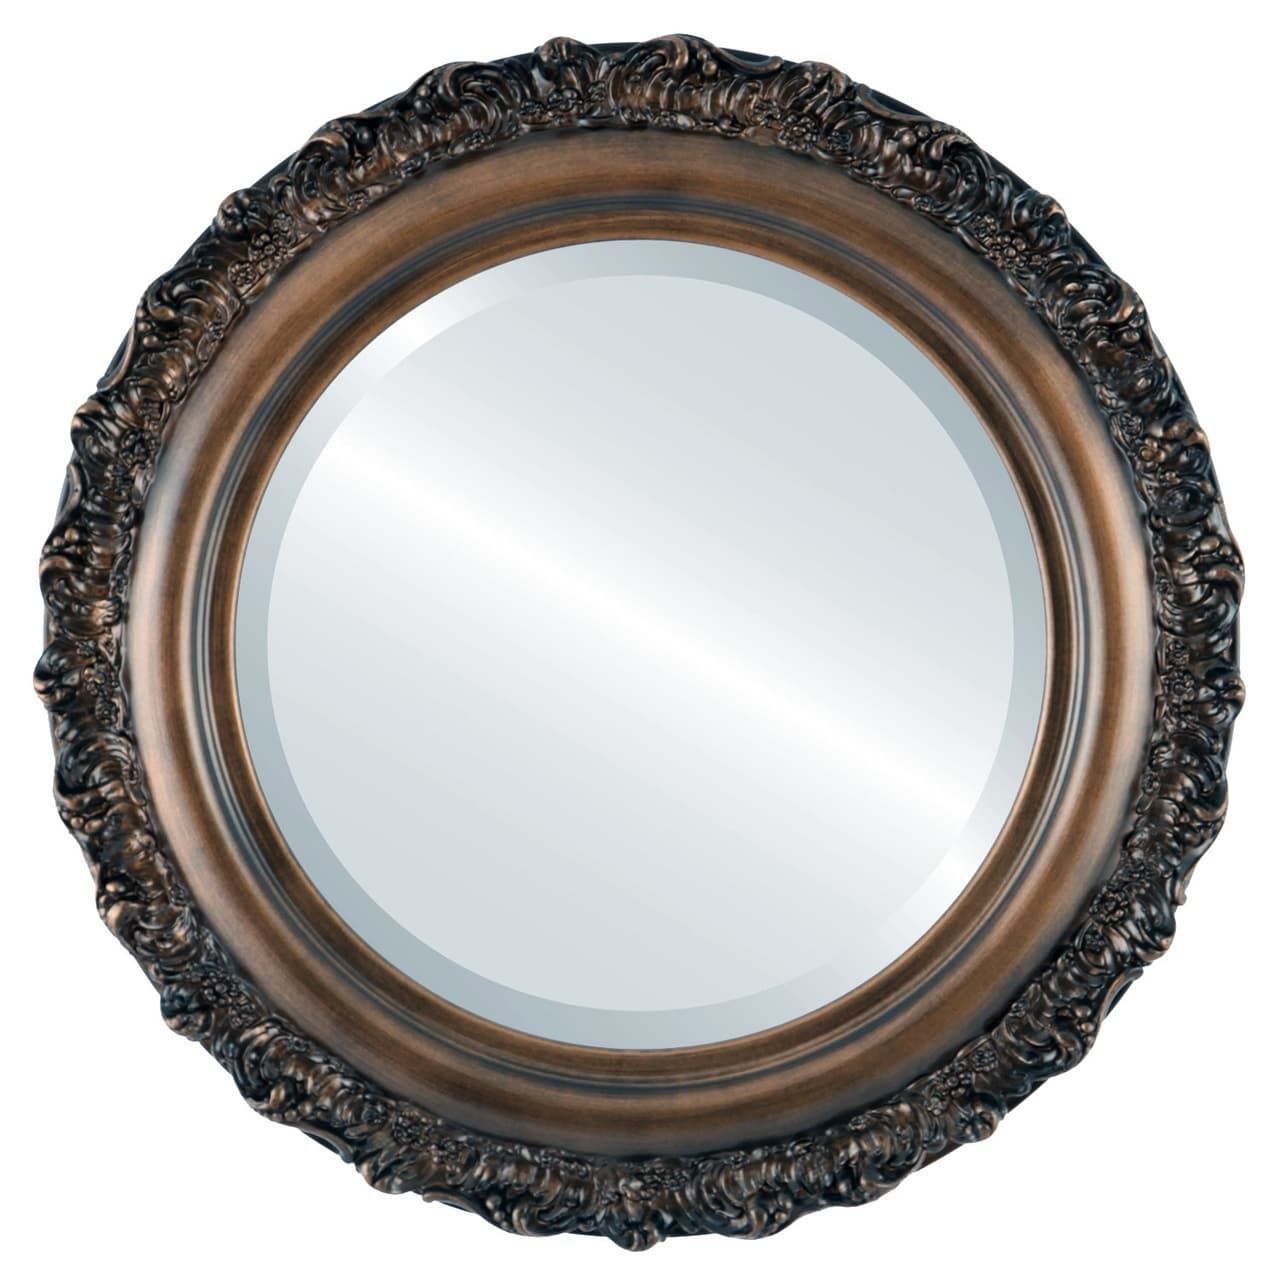 The Oval And Round Mirror Store Venice Framed Round Mirror In Rubbed For Bronze Quatrefoil Wall Mirrors (View 2 of 15)